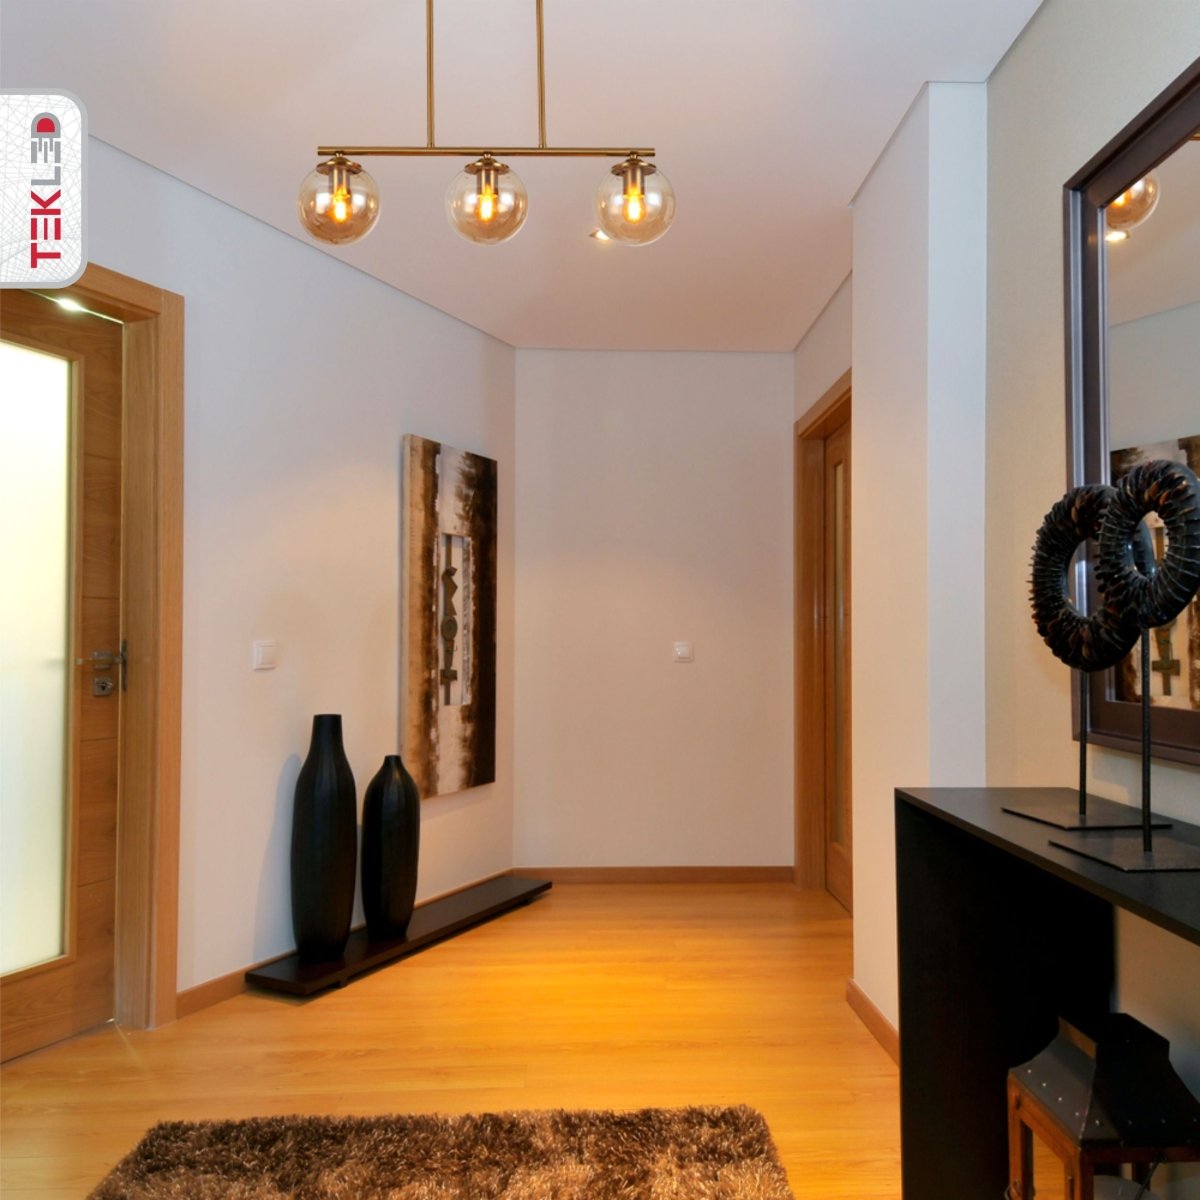 Interior application of Amber Globe Glass Gold Metal Body Ceiling Light with 3xE27 Fitting | TEKLED 159-17578